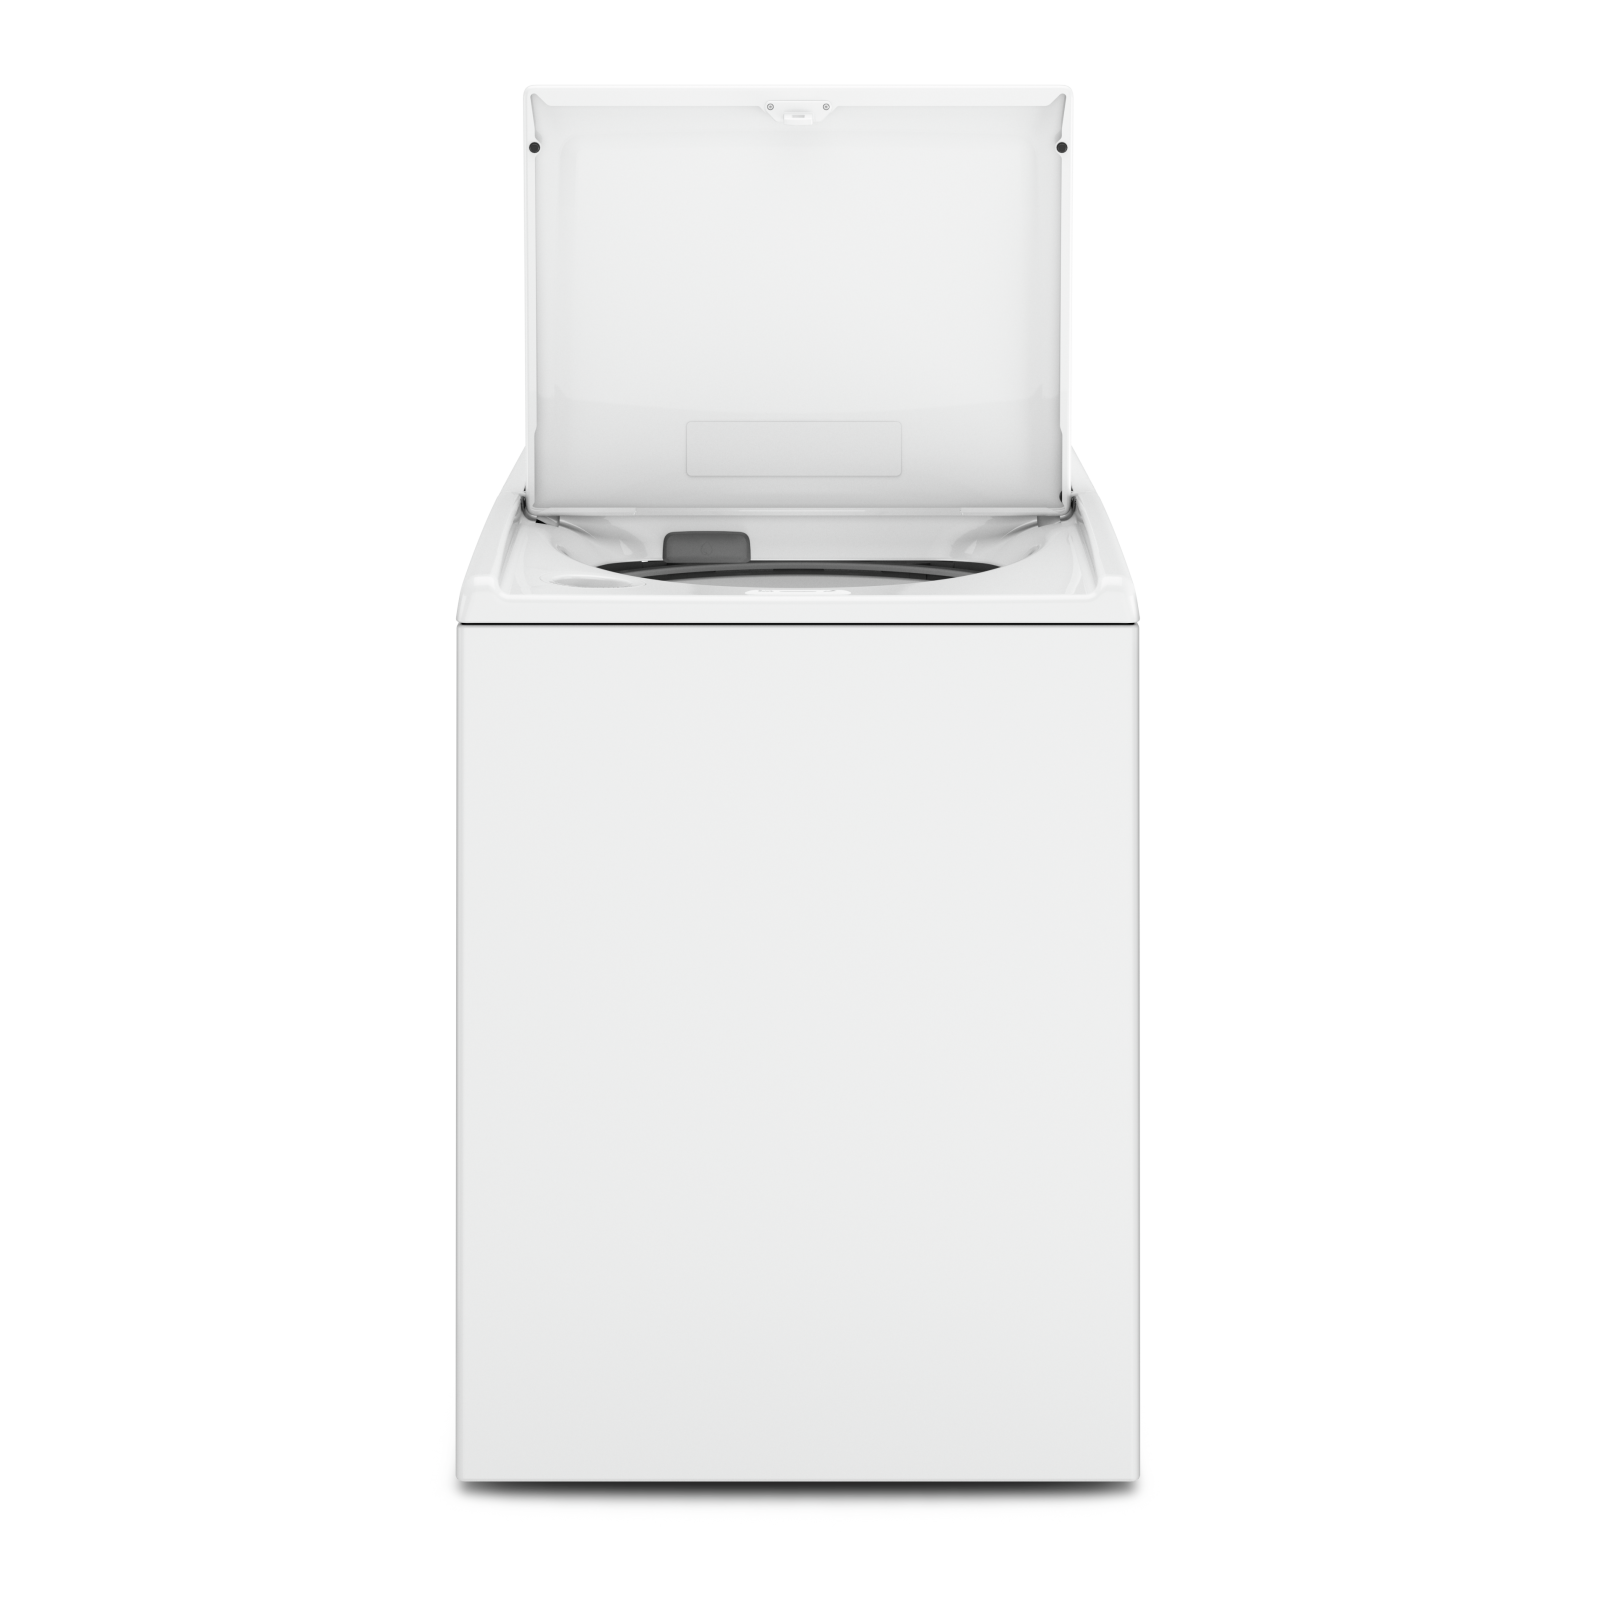 Whirlpool - 5.2 cu. Ft  Top Load Washer in White - WTW5015LW